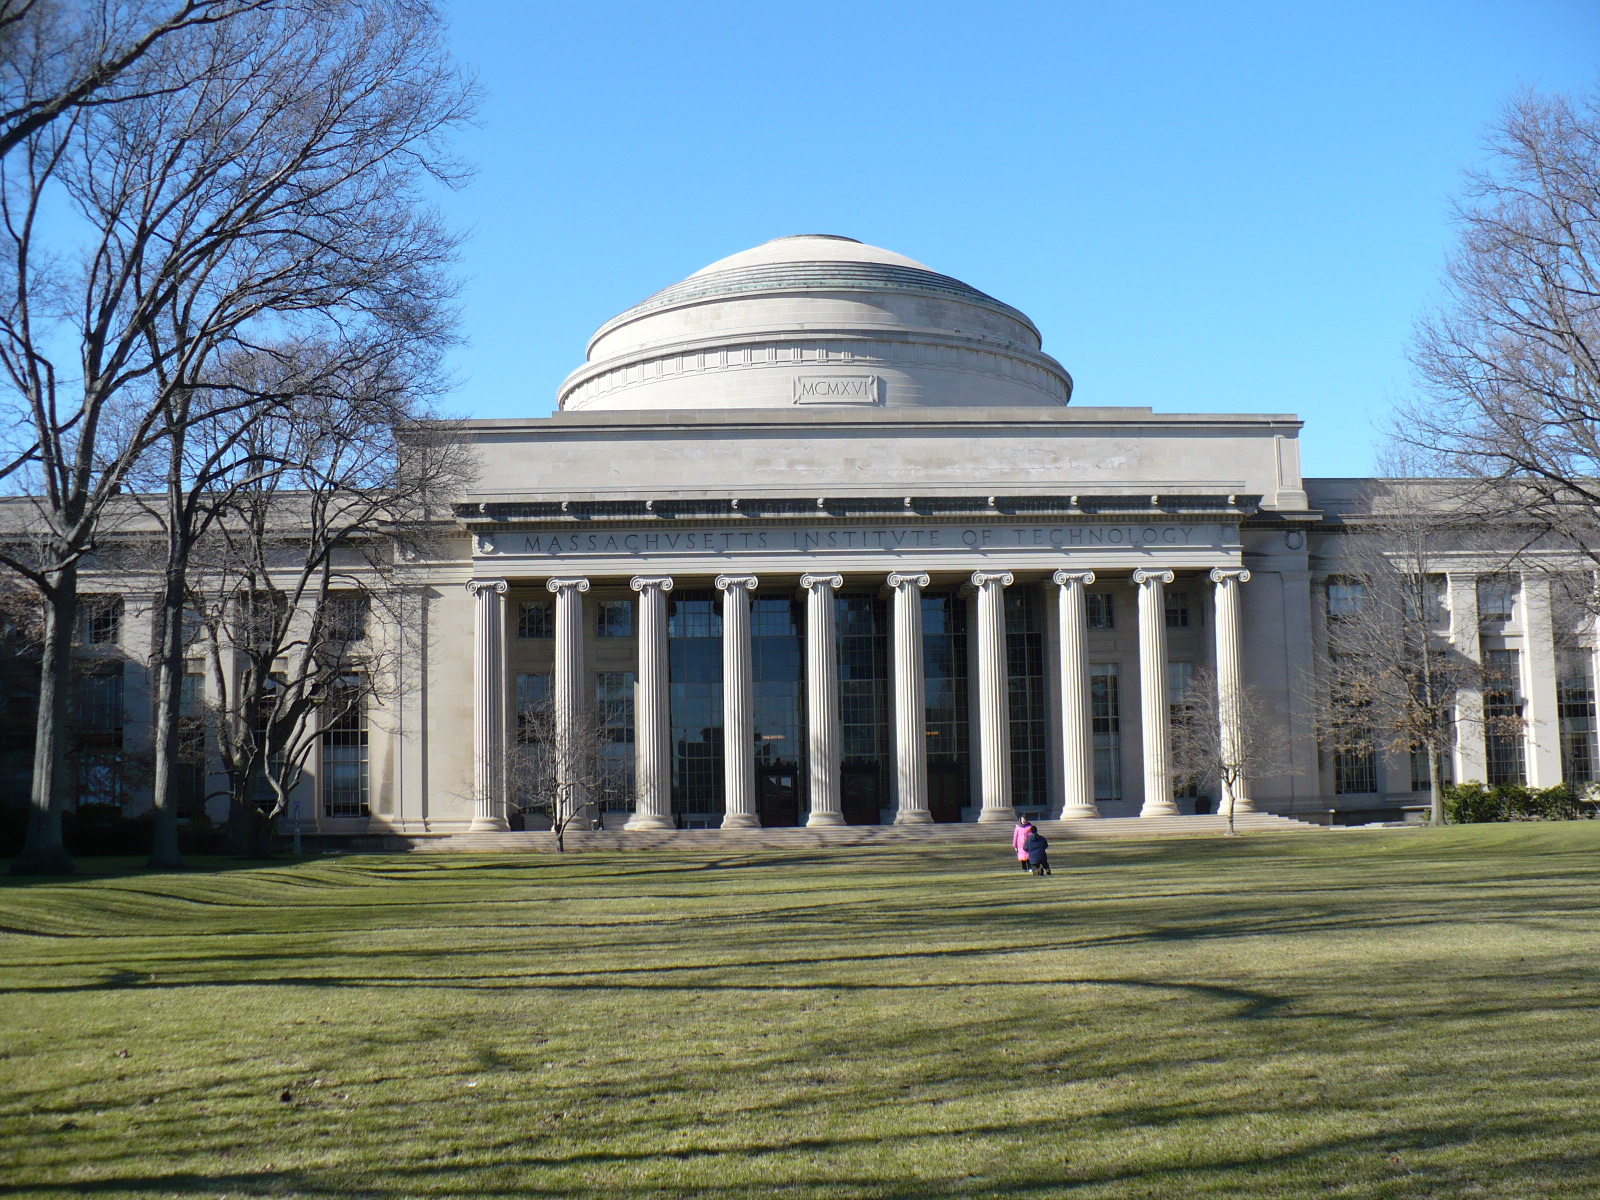 Gallery For Gt Mit Campus Wallpaper